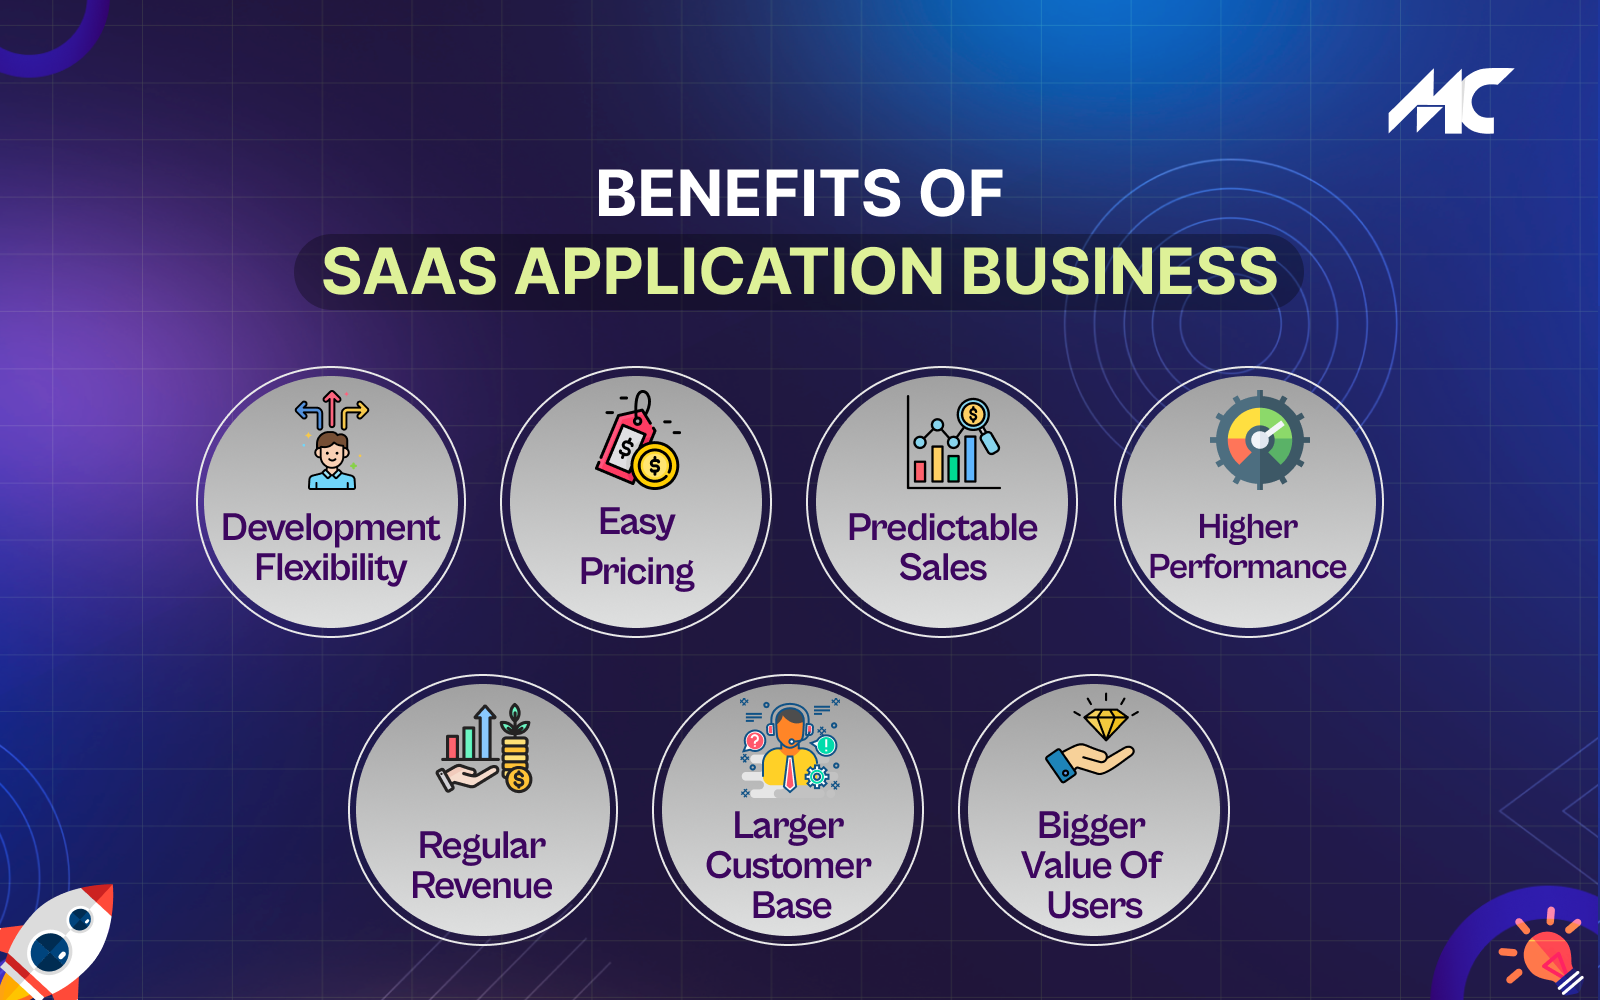 <img src="Benefits-of-SaaS-Application-Business.png" alt="Benefits-of-SaaS-Application-Business">